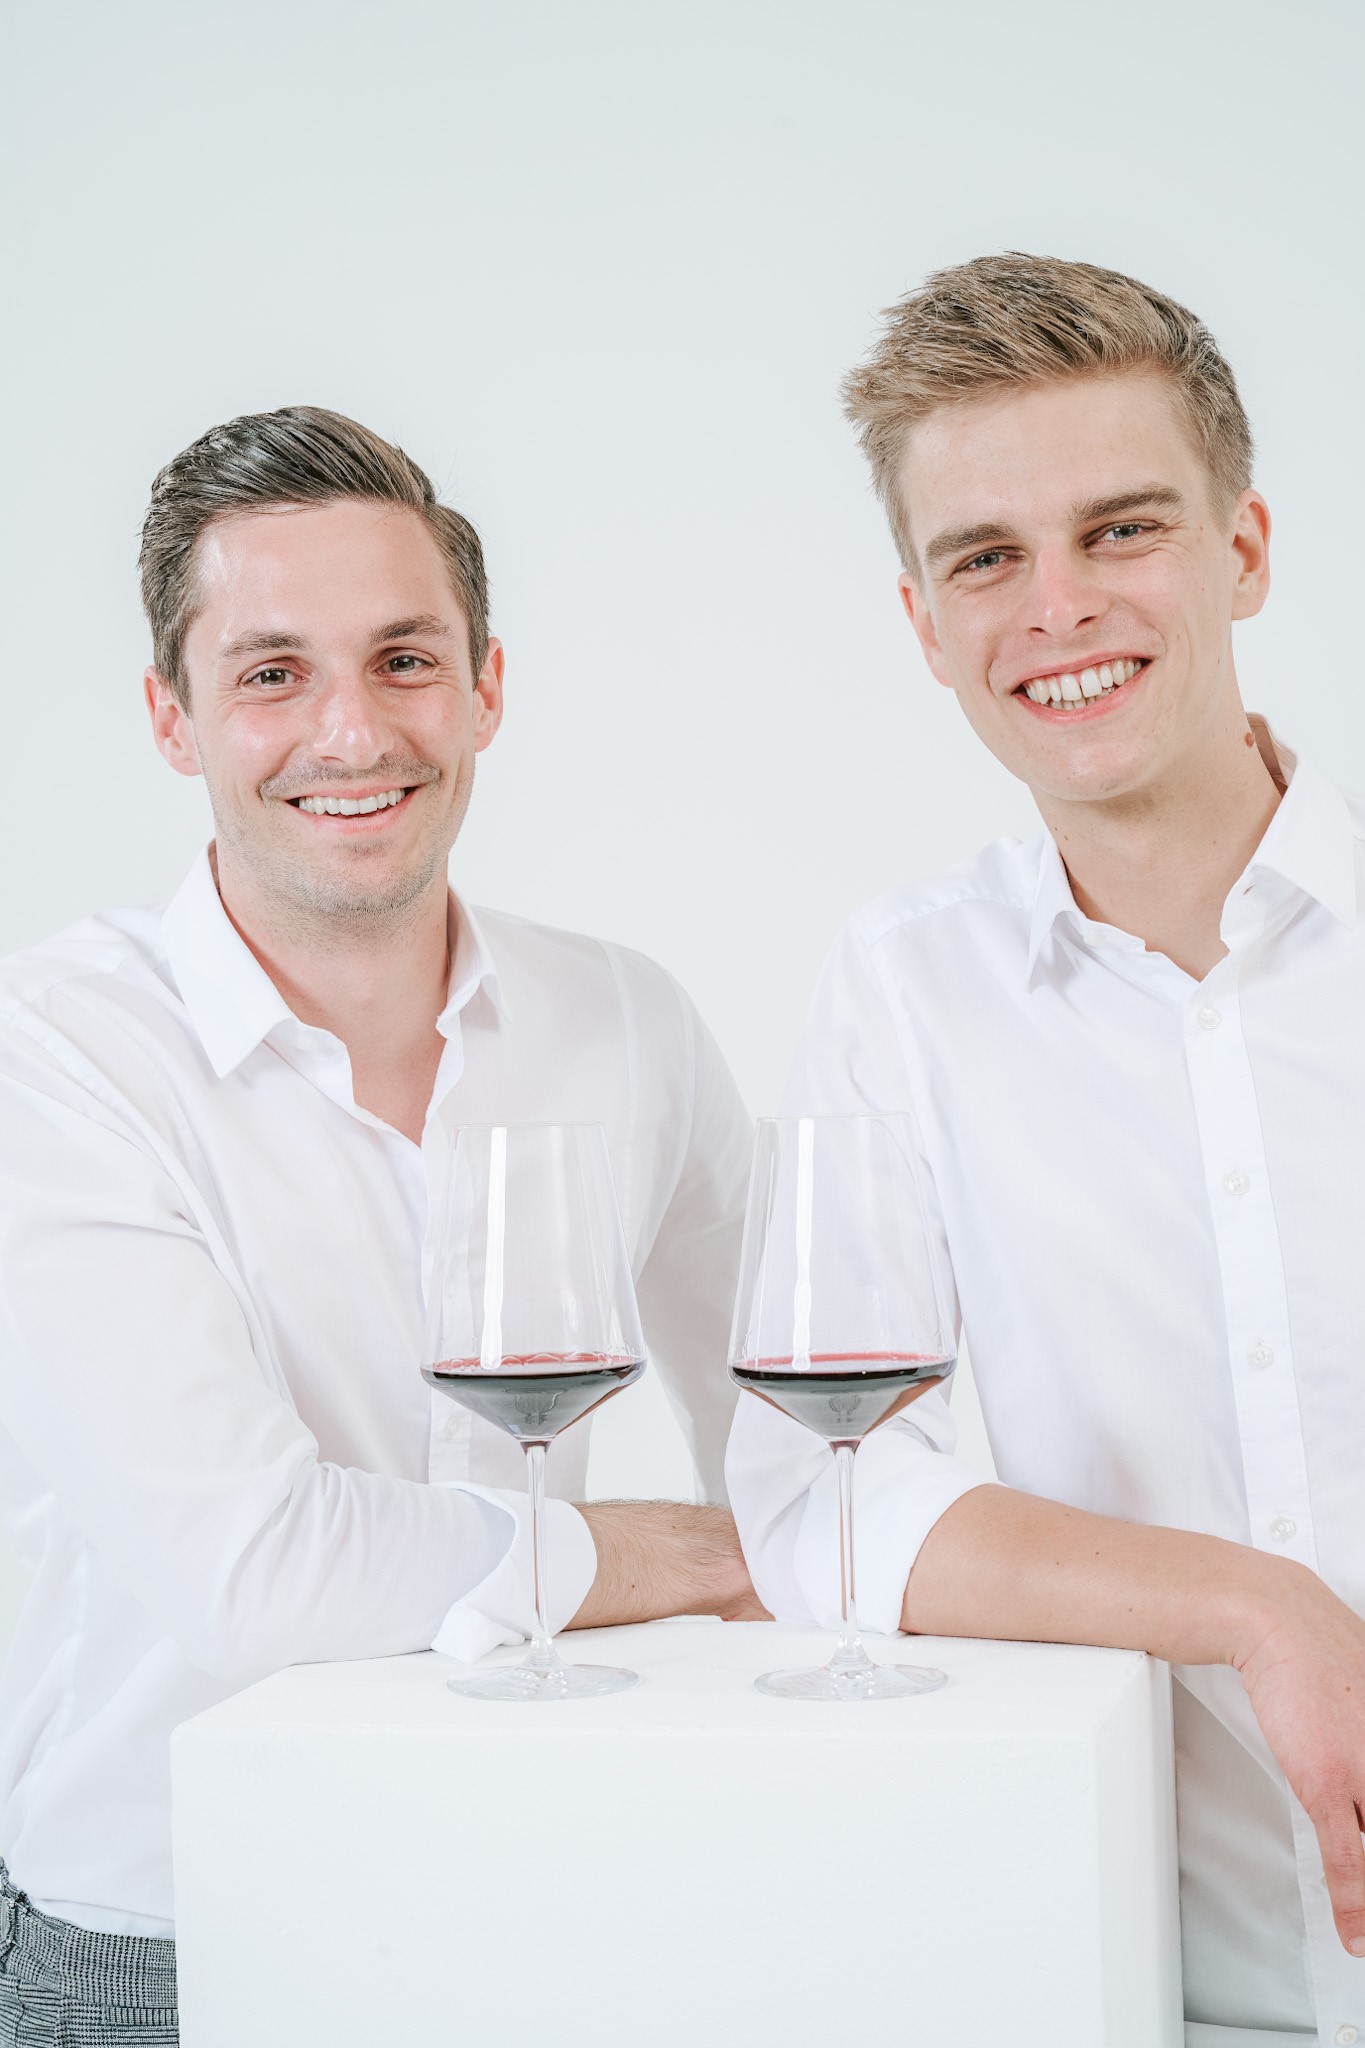 The founders of The WineStore, Maximilian Schiefer and Moritz